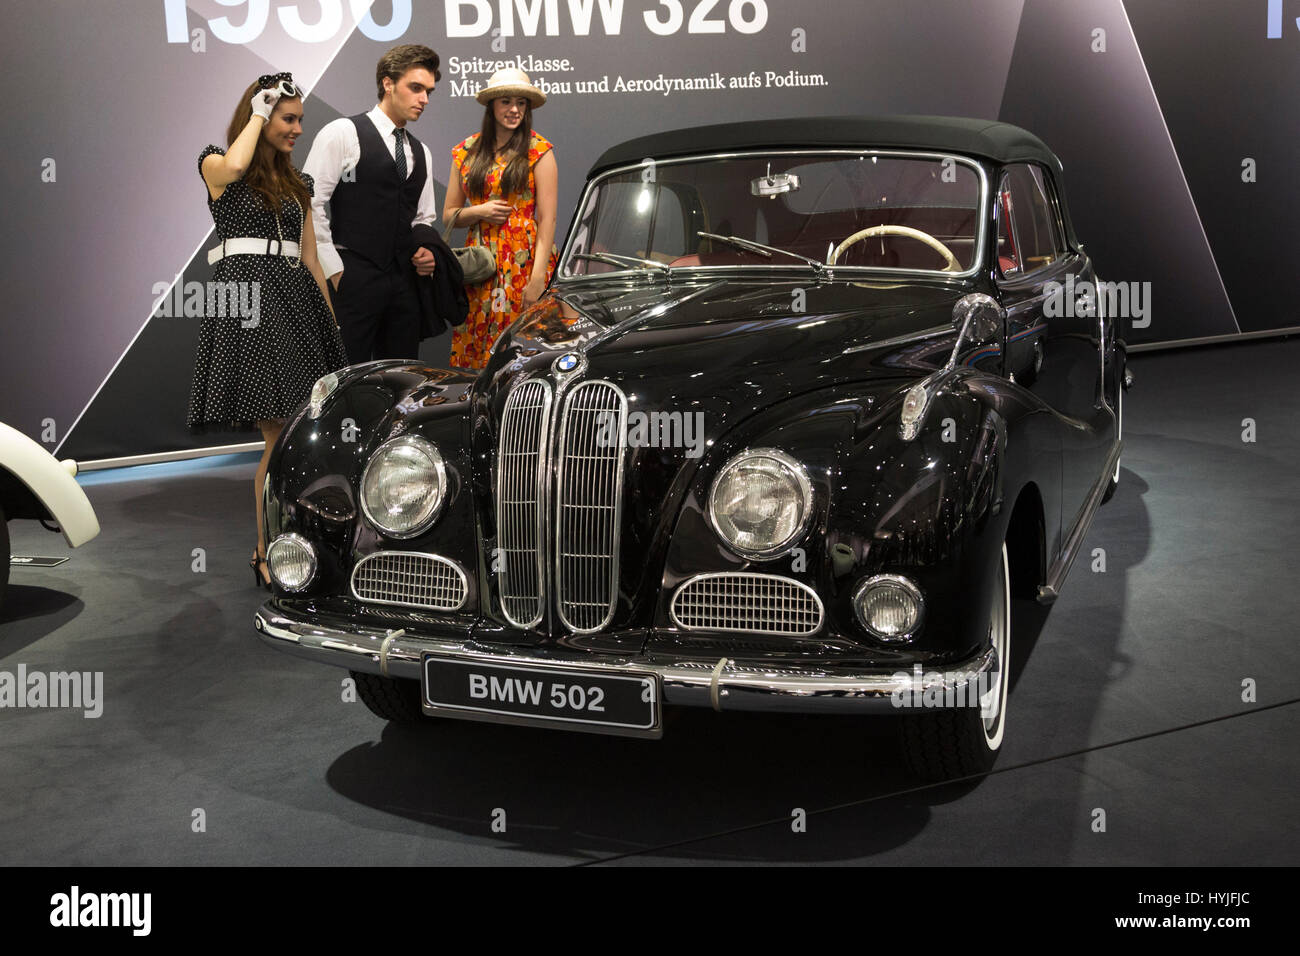 Essen, Germany. 5th Apr, 2017. A 1952 BMW 502. Press preview of the 29th Techno-Classica motor show in Essen, show for vintage, classic and prestige cars and motor sports. The motor show runs from 5 to 9 April 2017. Credit: OnTheRoad/Alamy Live News Stock Photo